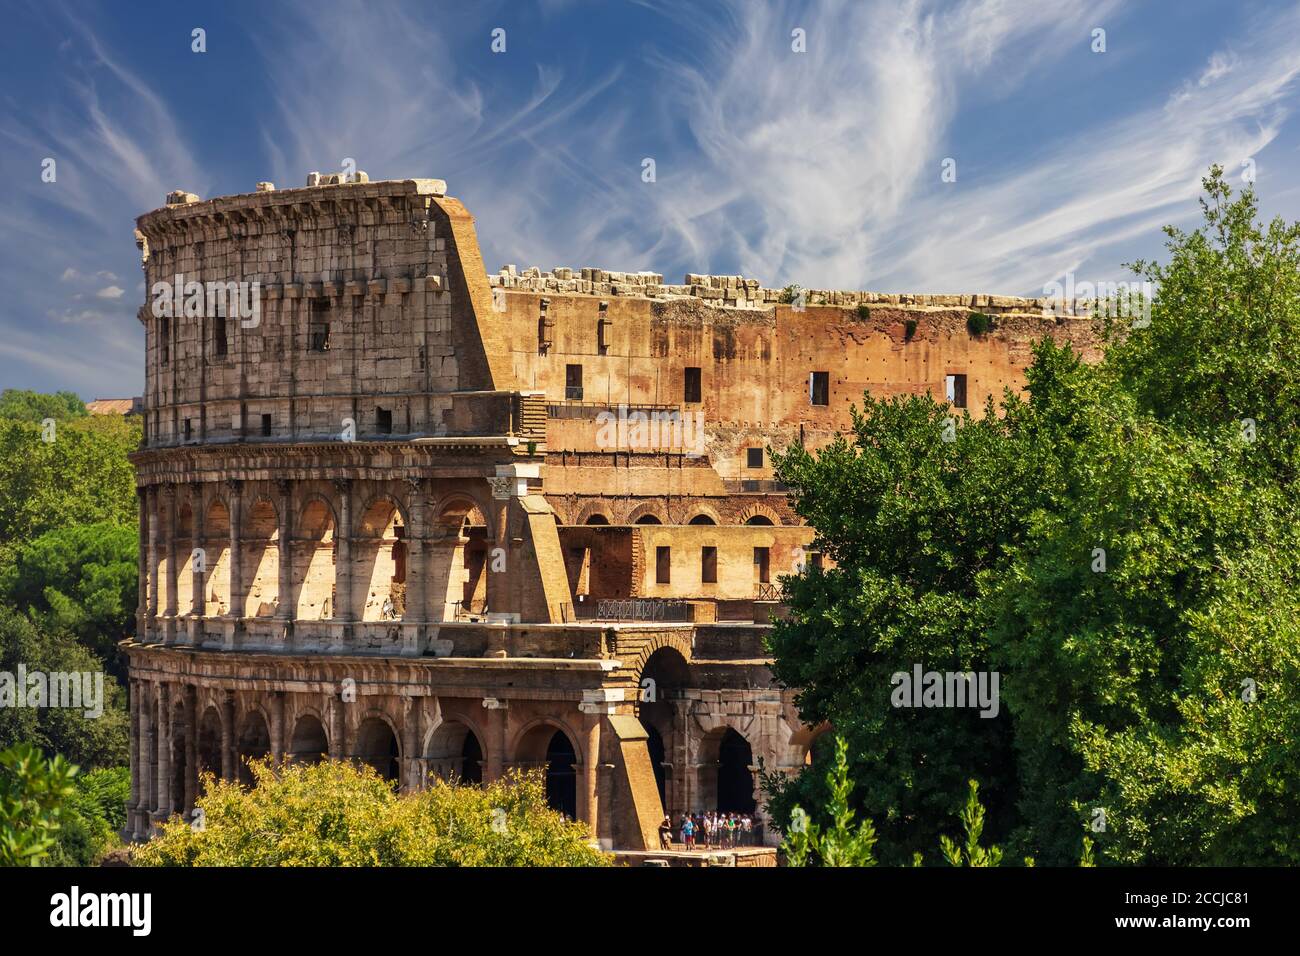 Roman Colosseum, view from the Forum on the Capitoline Hill, Italy Stock Photo